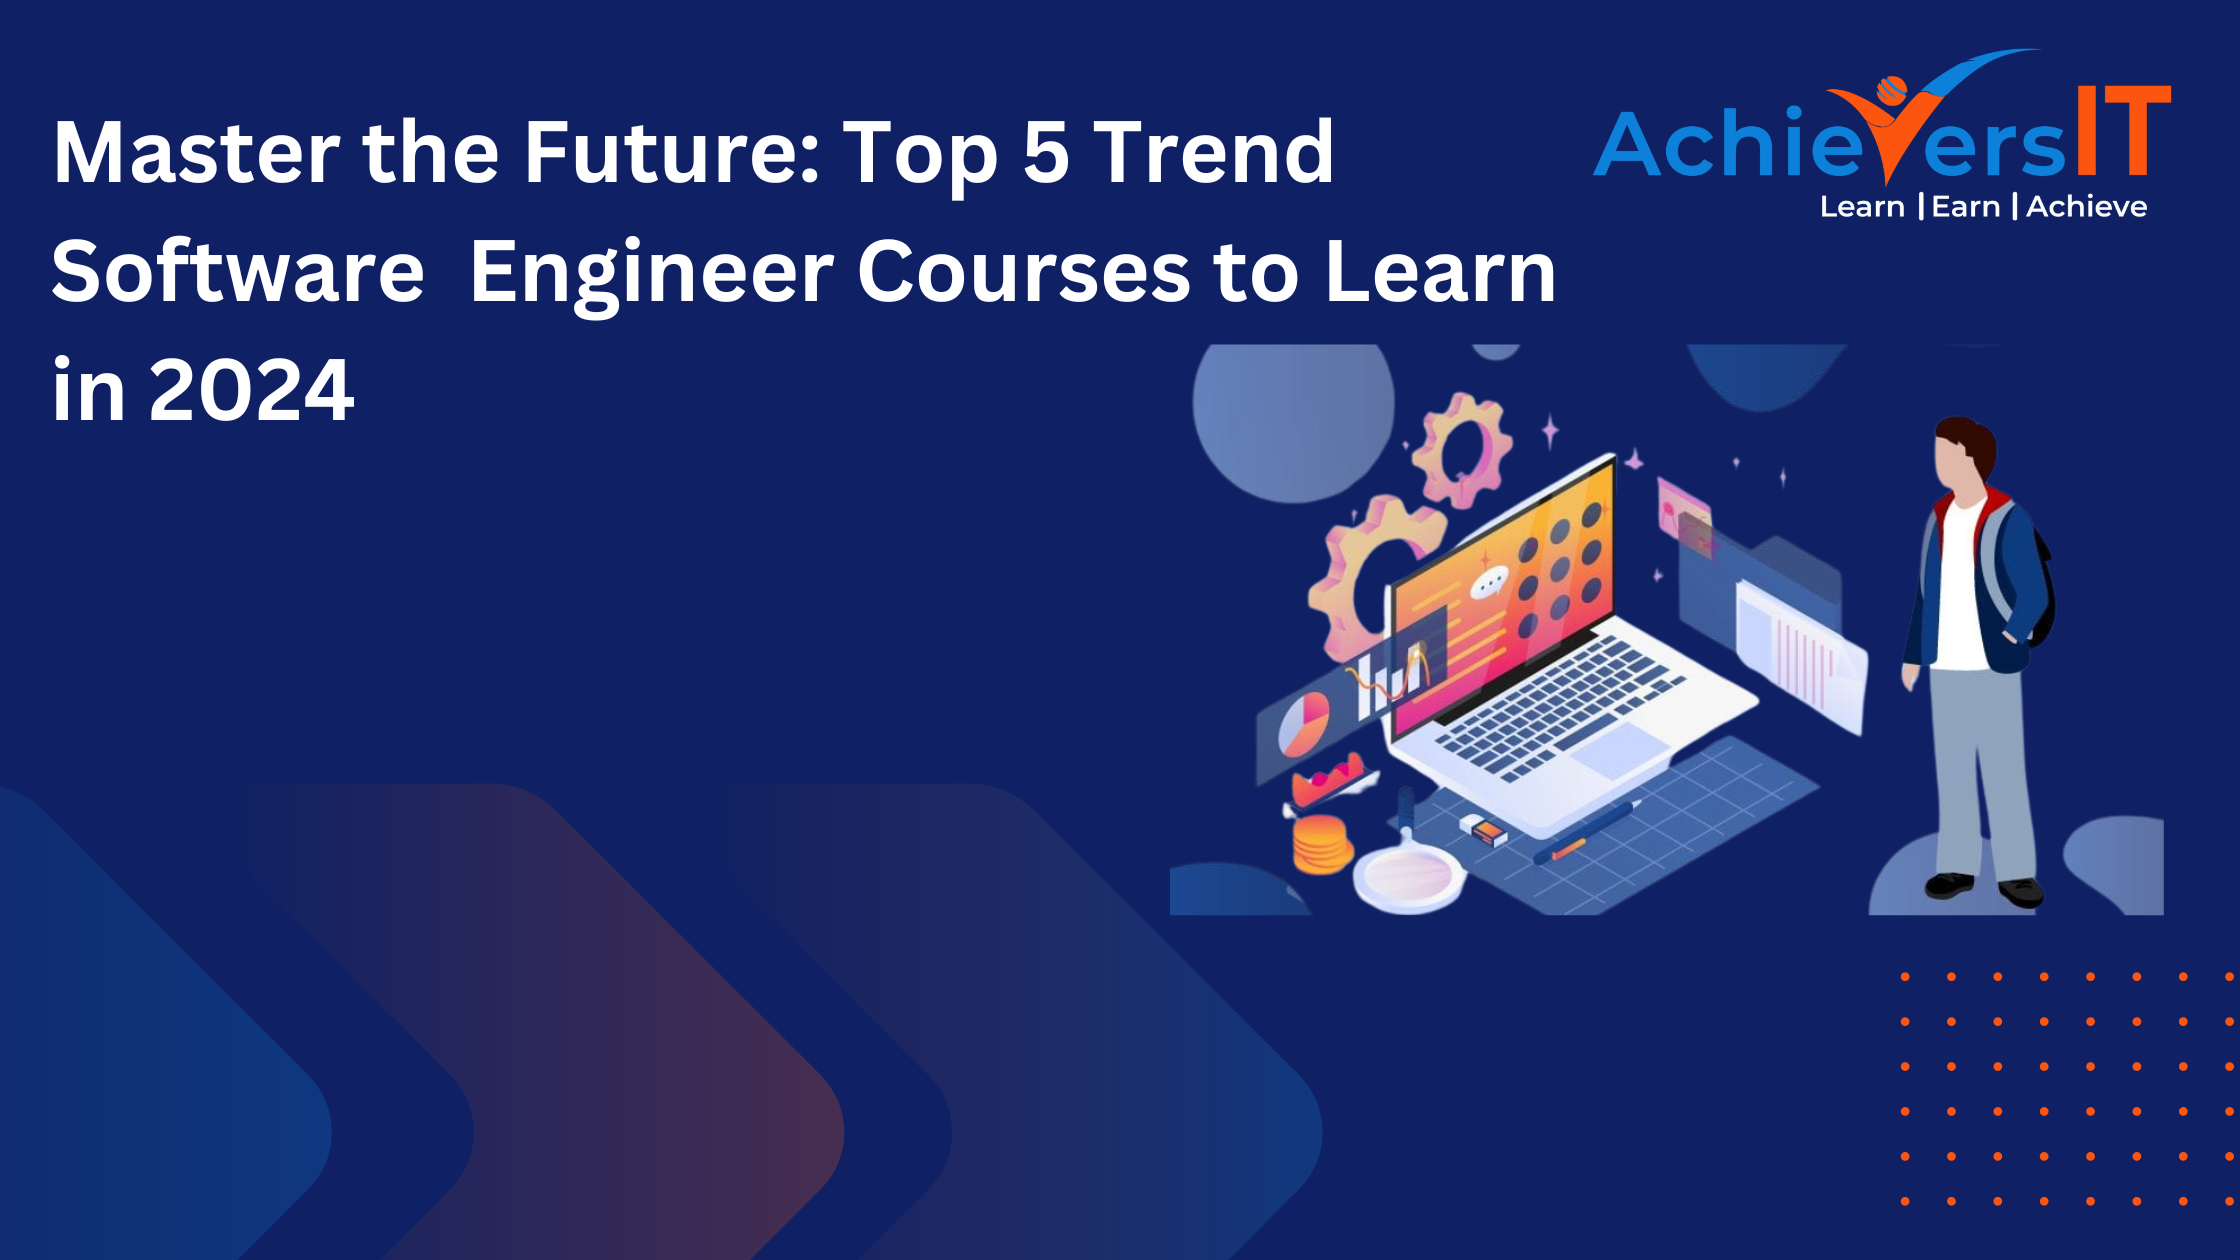 Master the Future: Top 5 Trend Software  Engineer Courses to Learn in 2024